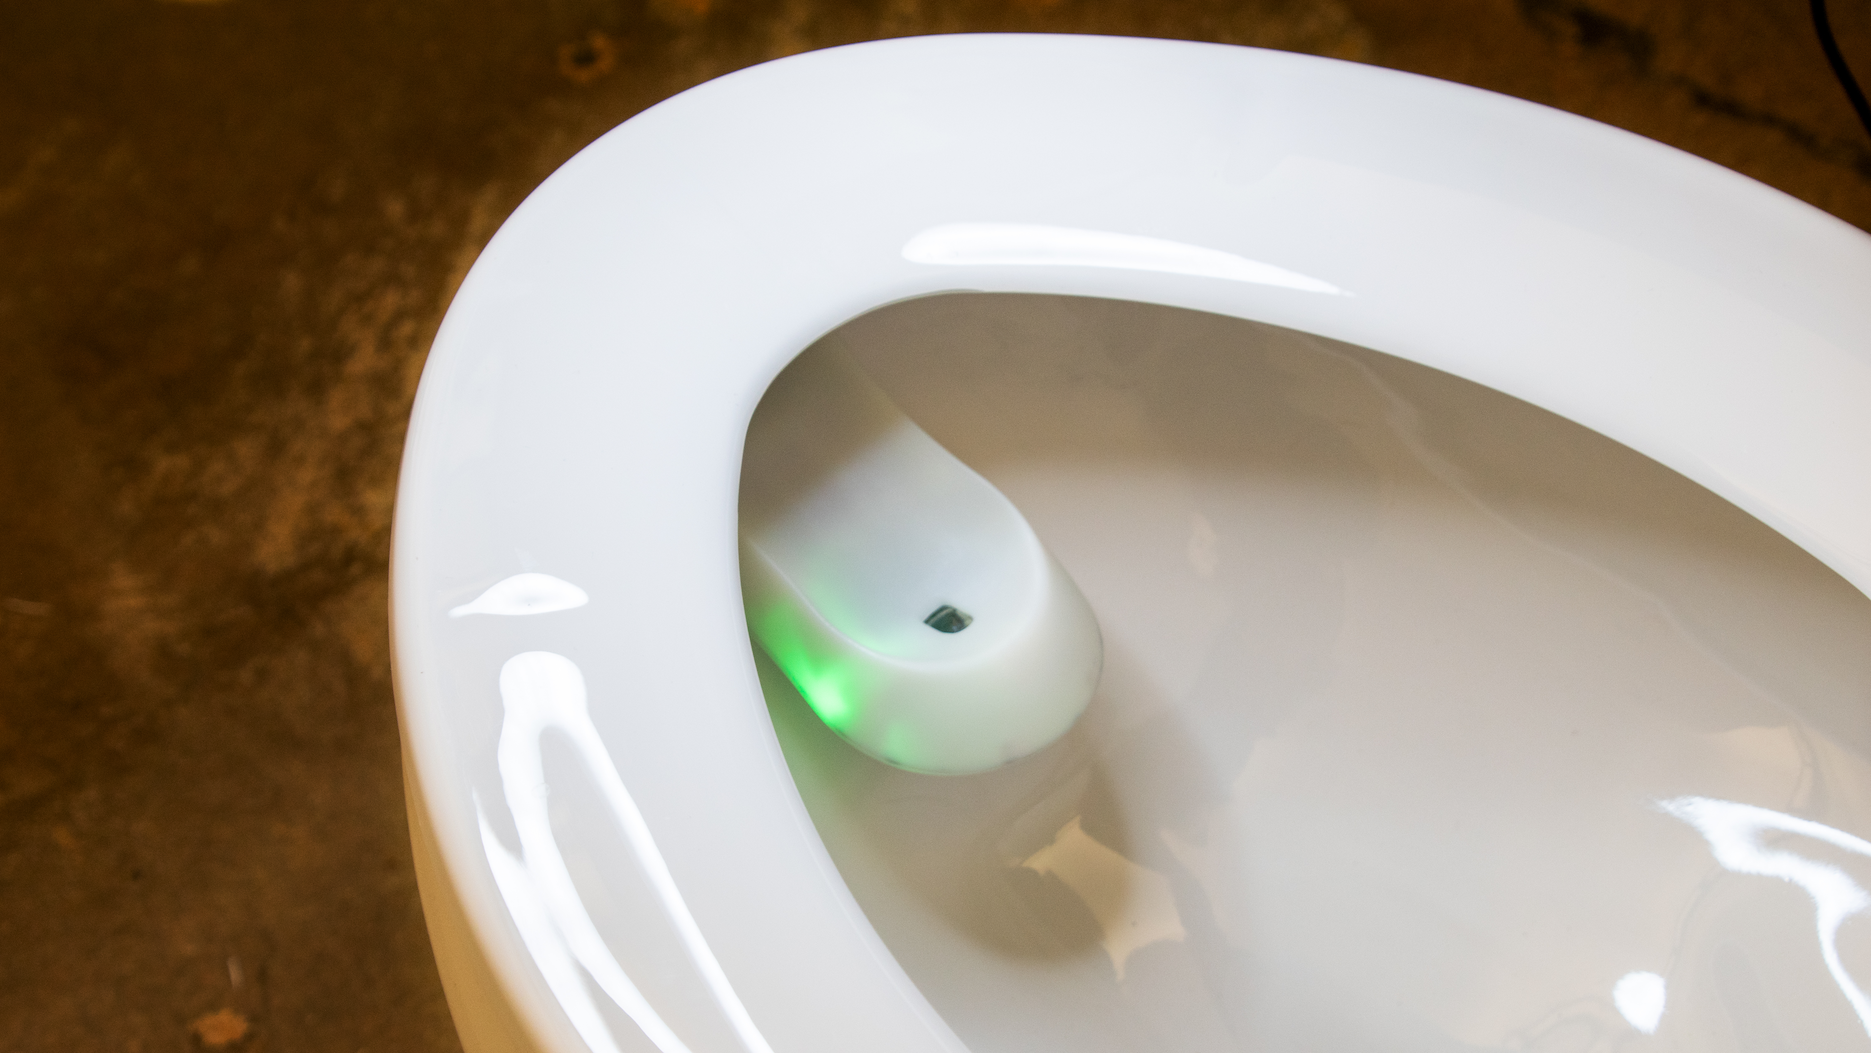 techcrunch.com - Christine Hall - Starling Medical's new urine-testing device turns your toilet into a health tracker